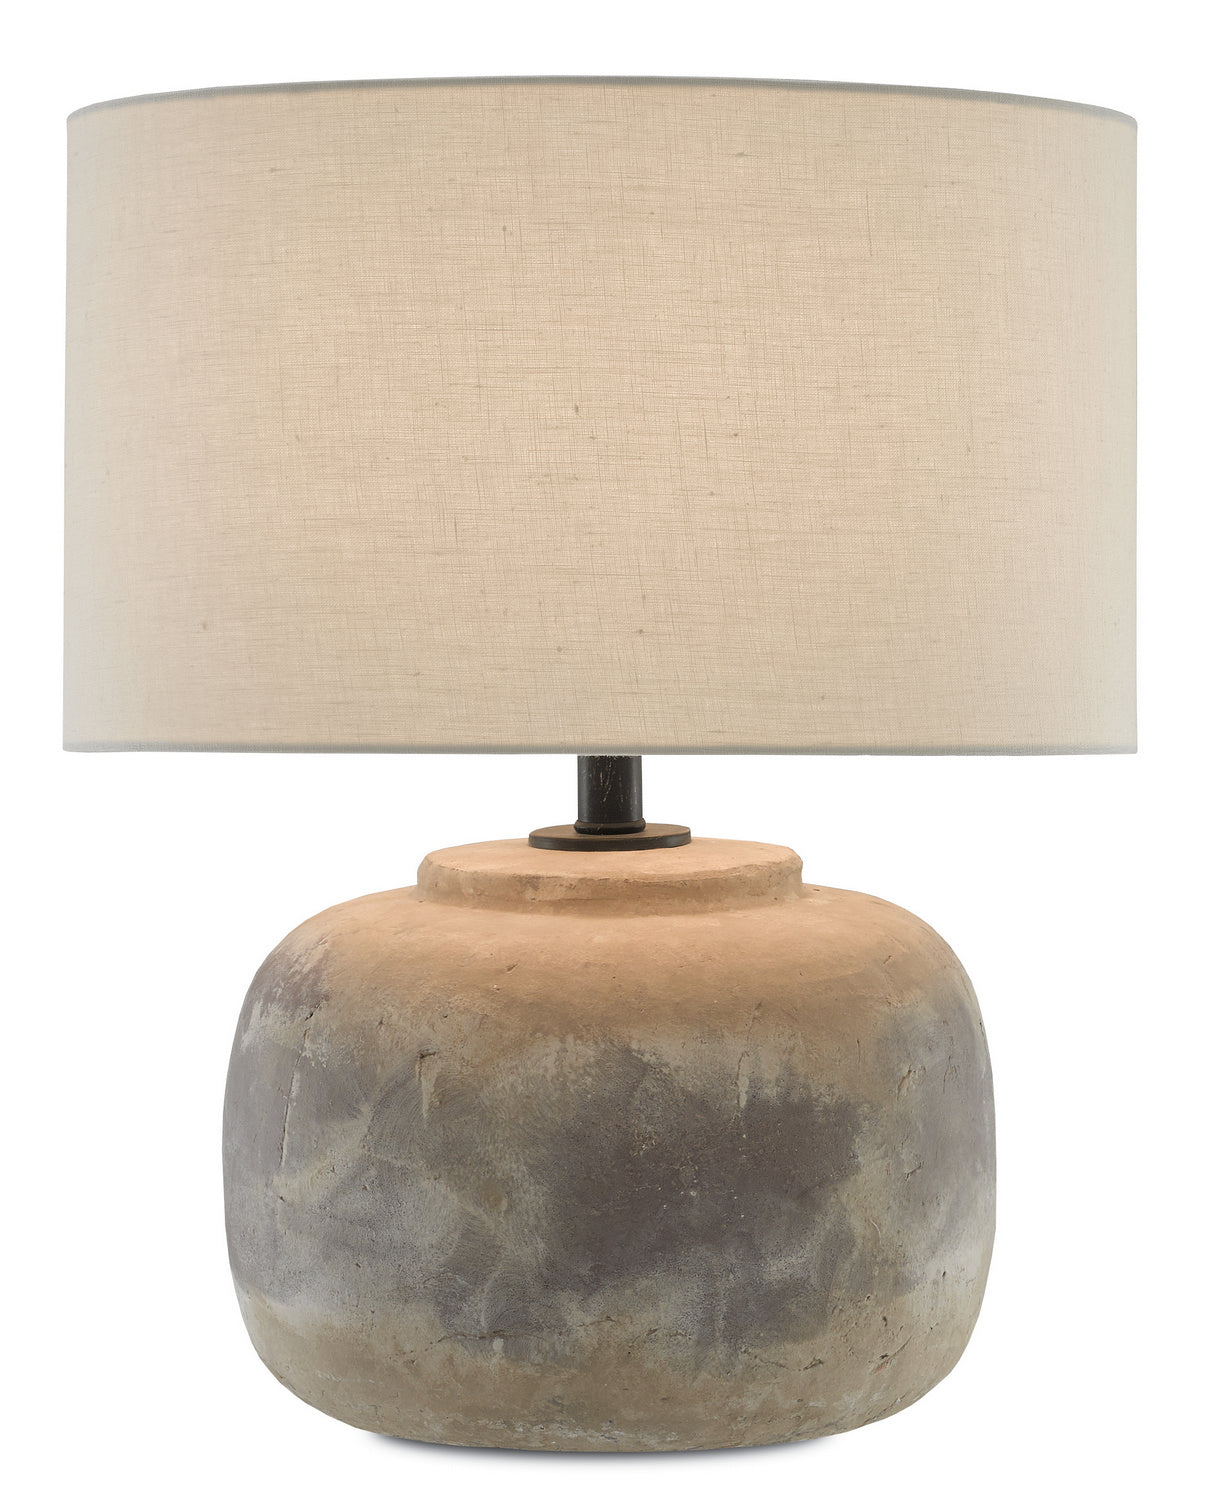 One Light Table Lamp from the Beton collection in Antique Earth finish